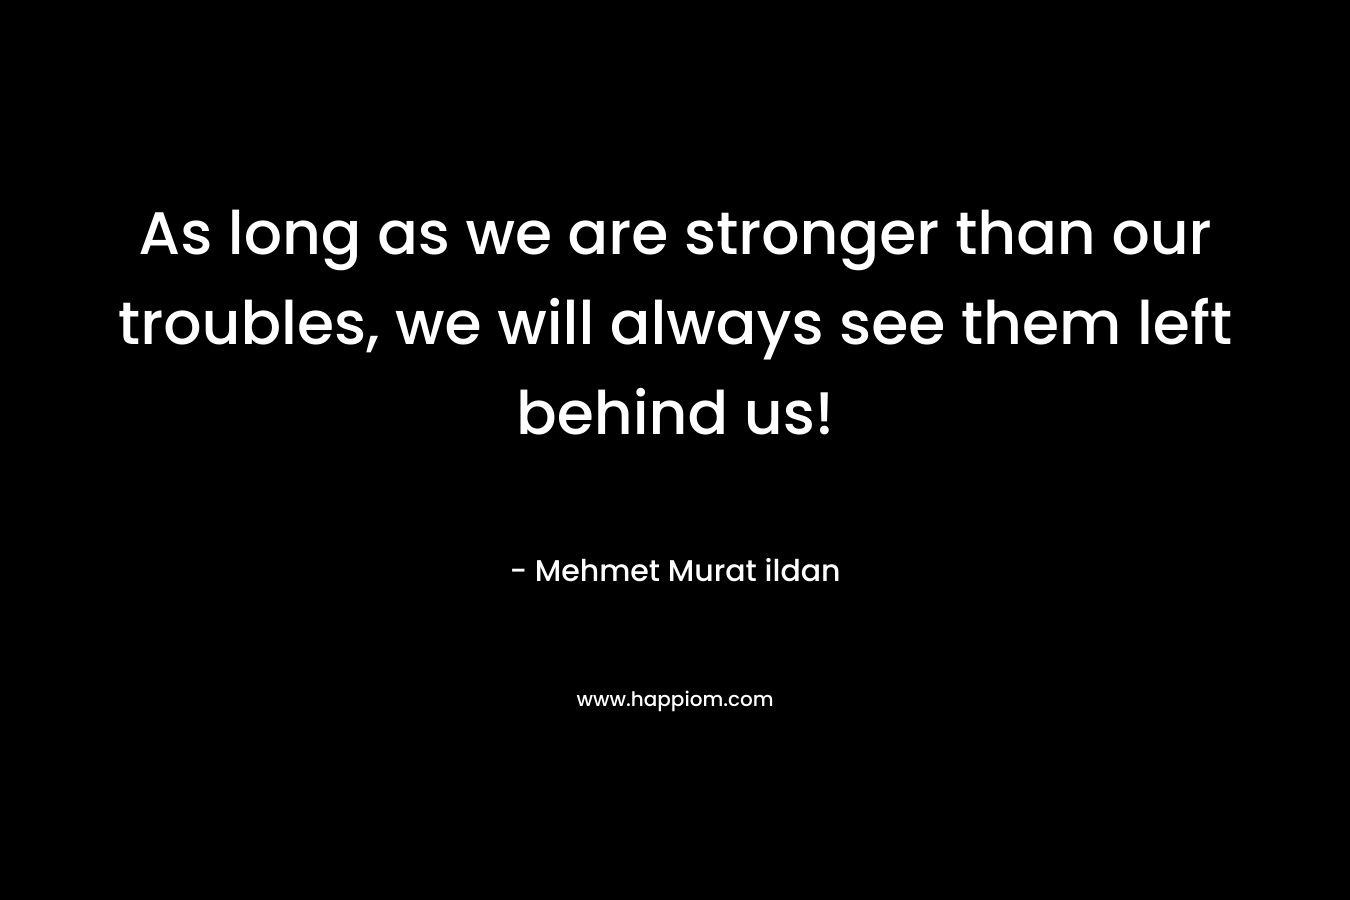 As long as we are stronger than our troubles, we will always see them left behind us! – Mehmet Murat ildan